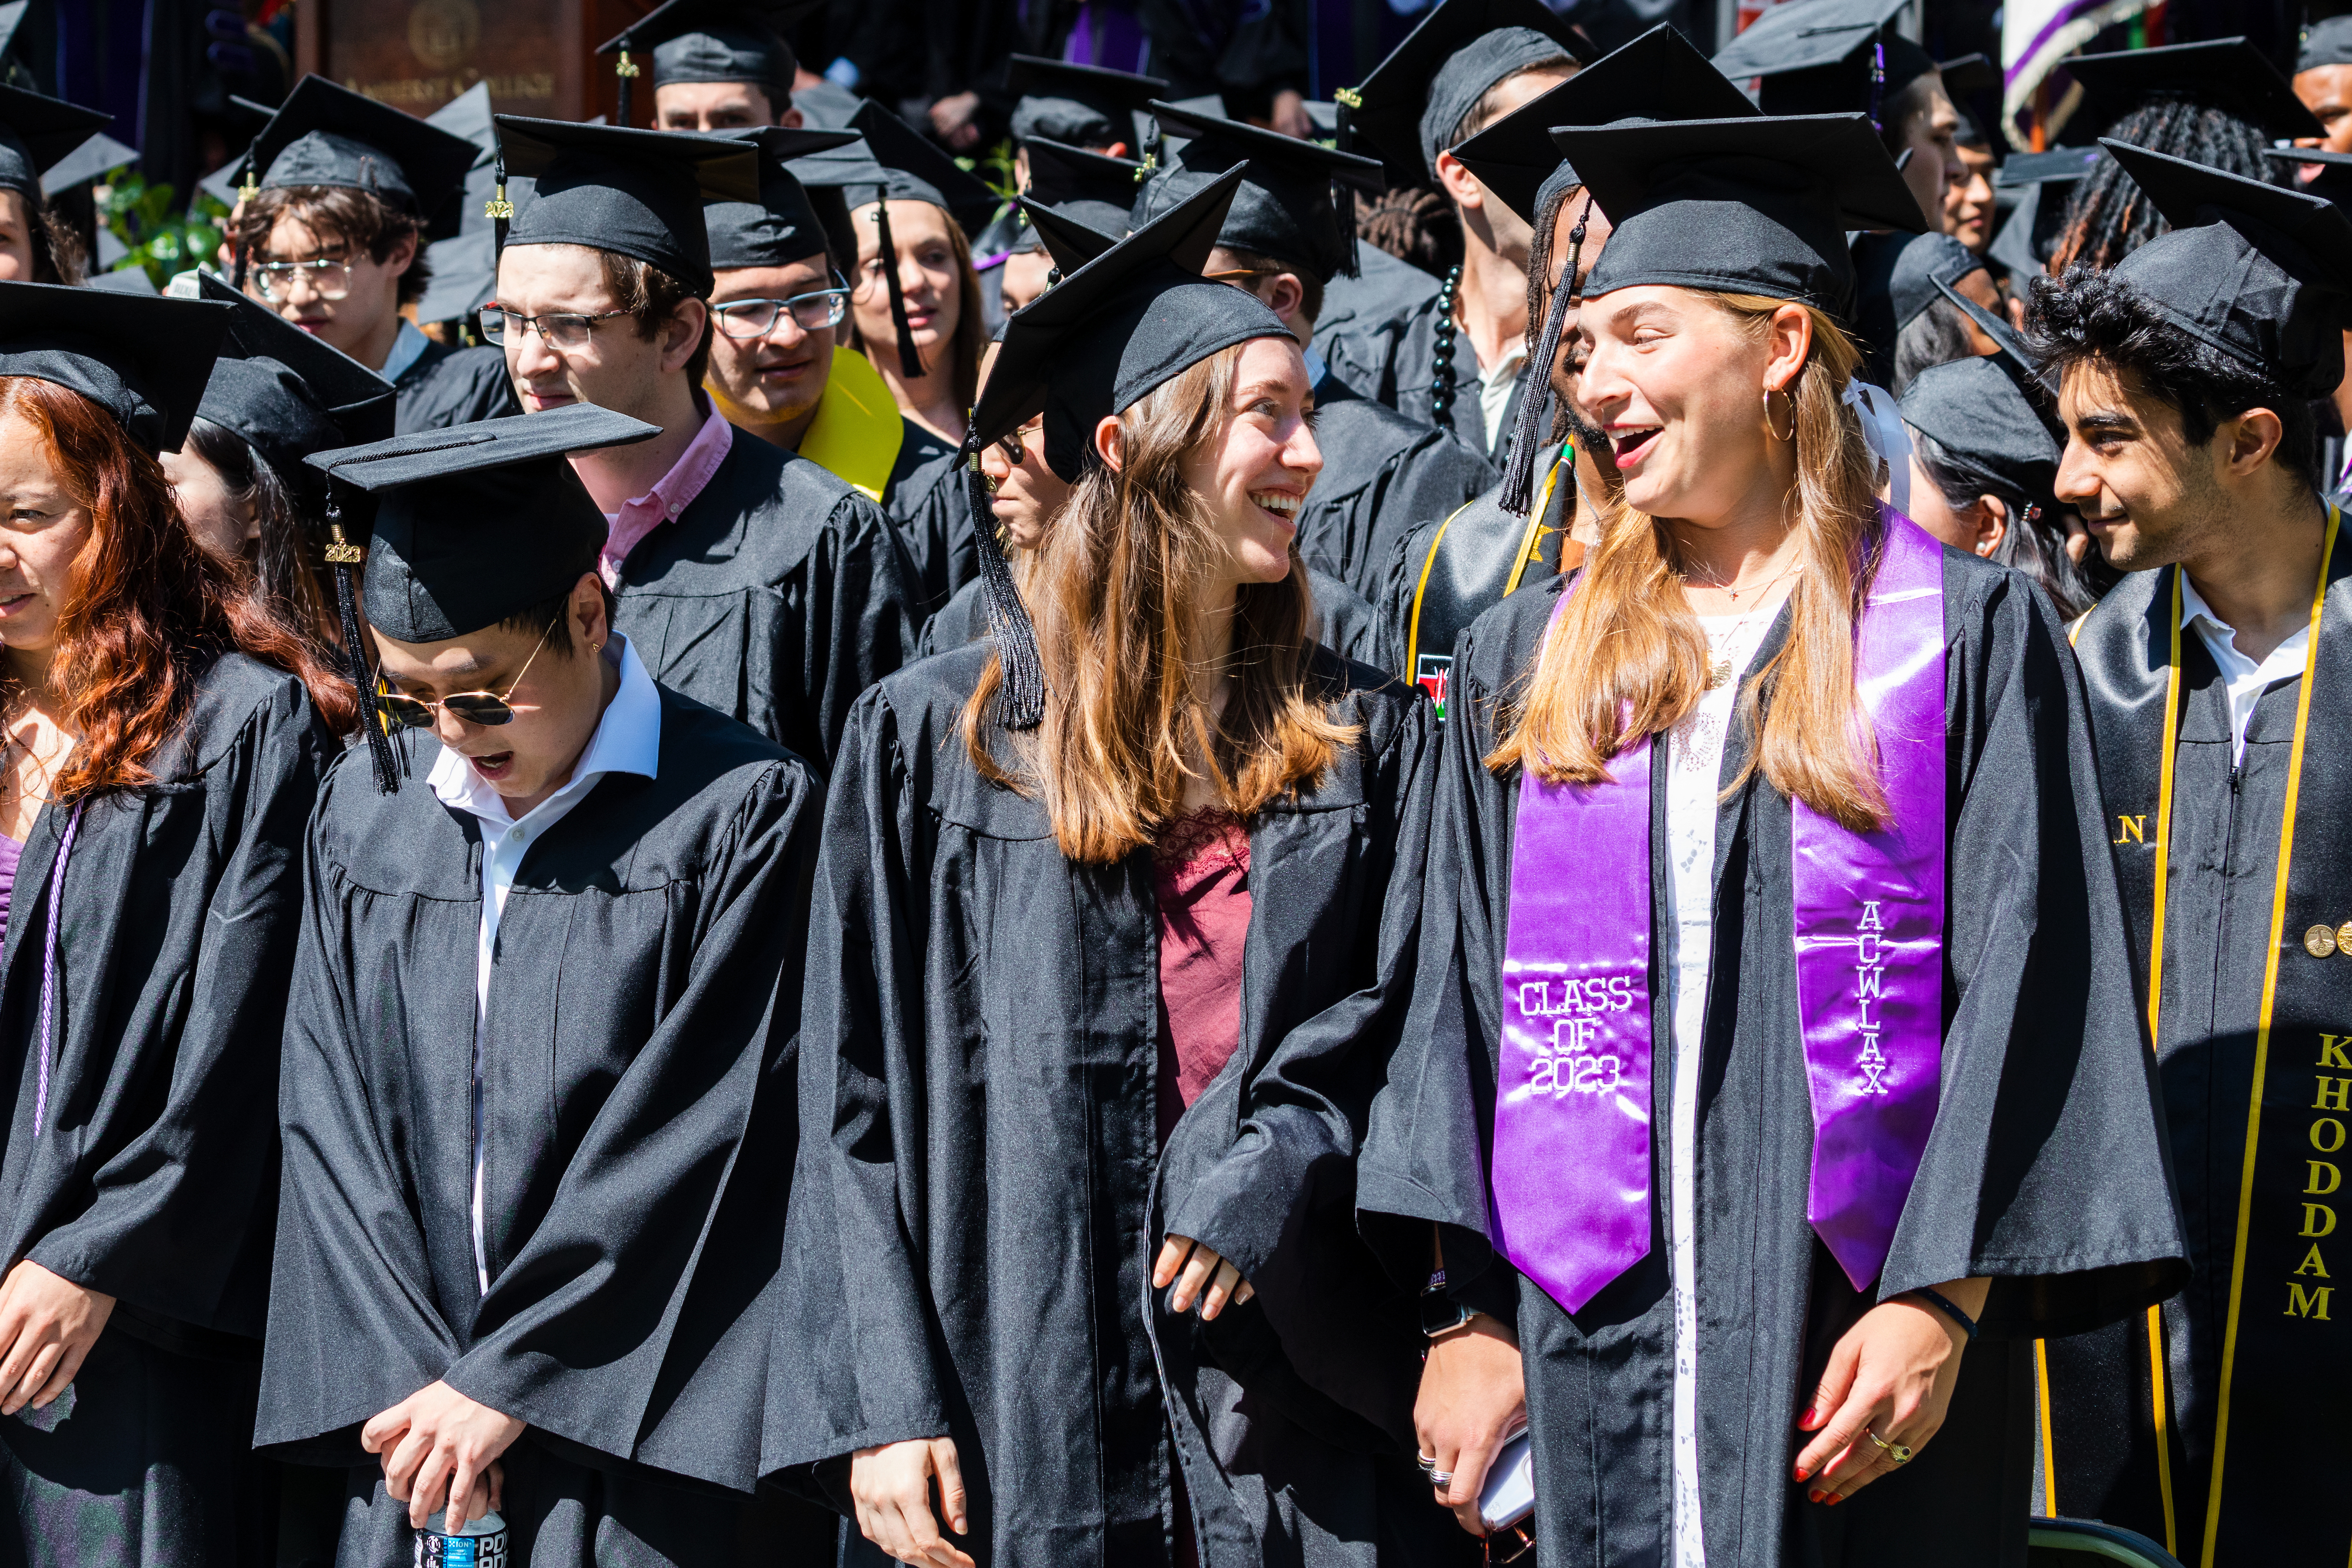 Students line up in front of their seats during Commencement.